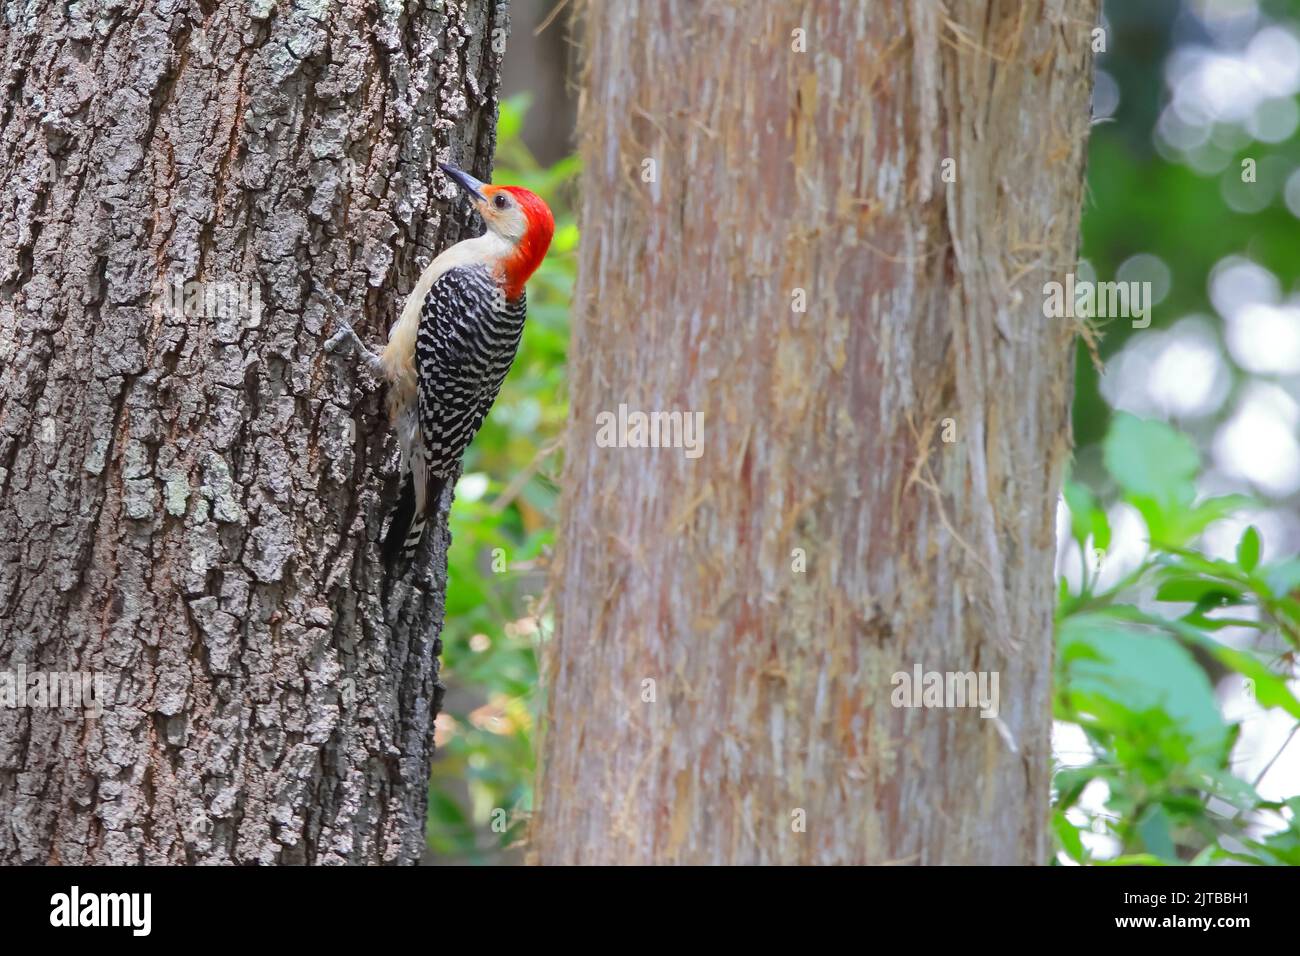 A beautiful shot of male red-bellied woodpecker clinging to a large tree trunk Stock Photo